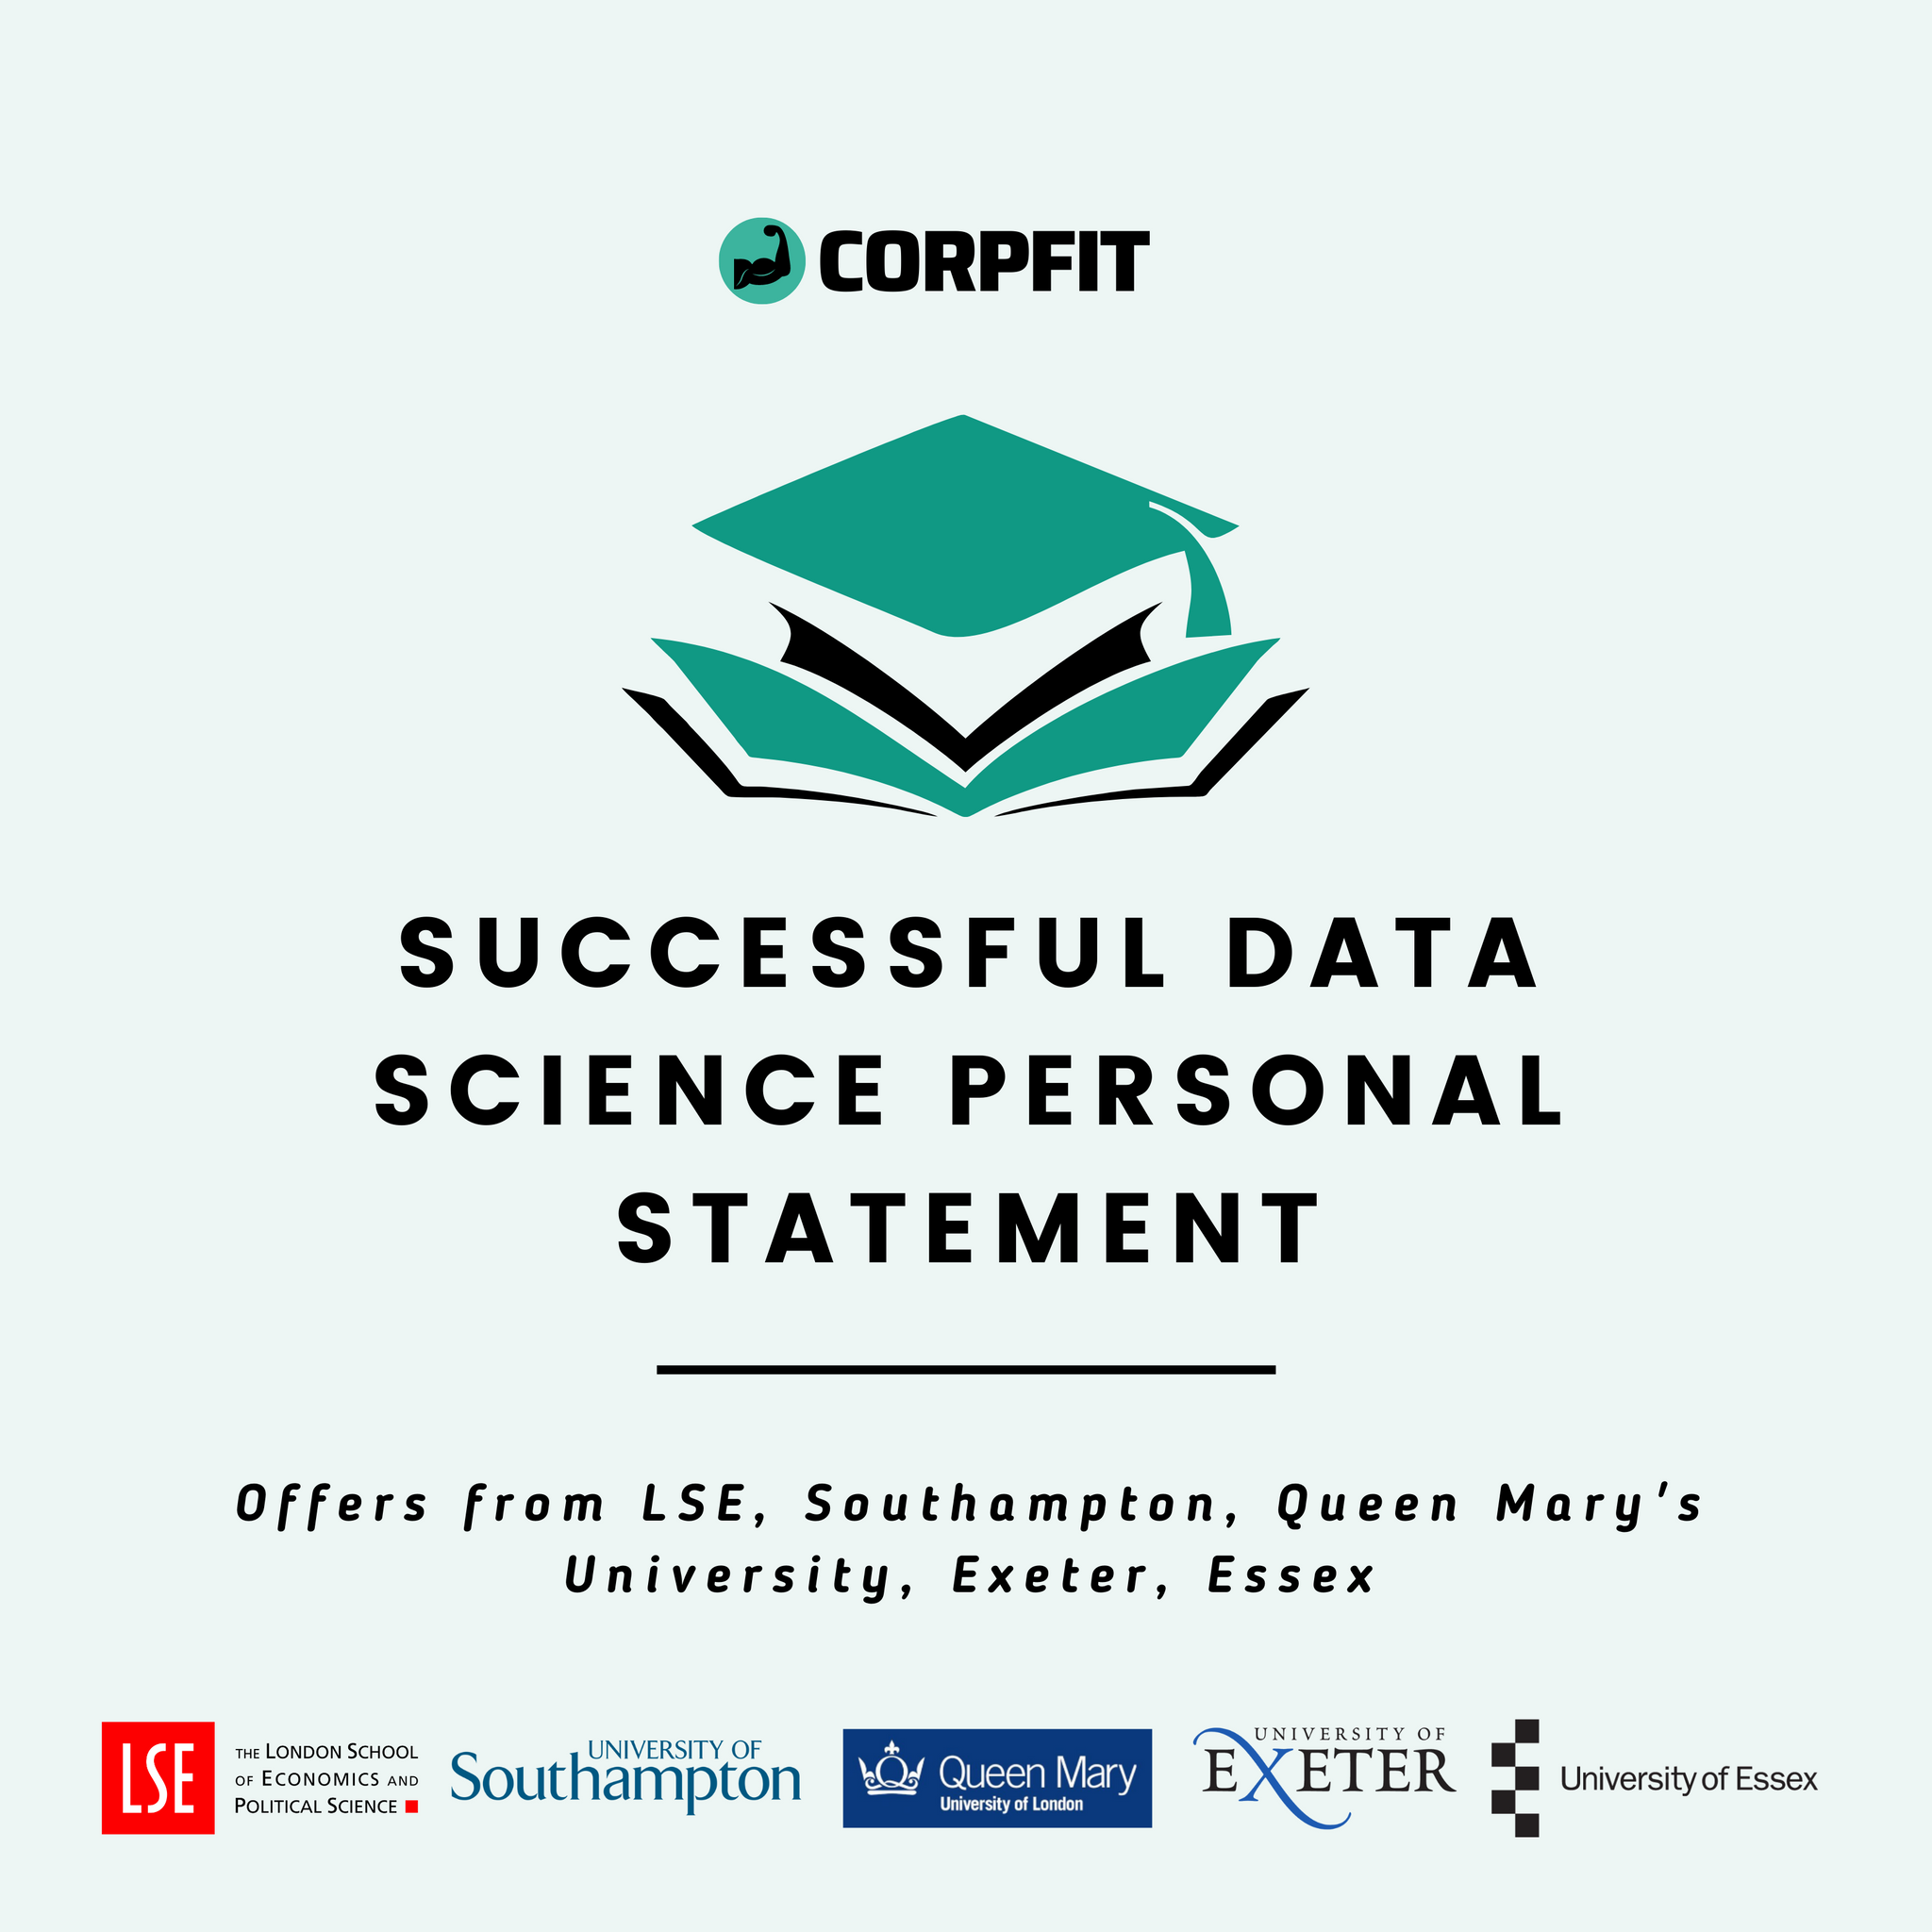 Successful Data Science Personal Statement 2021 (LSE, Southampton, Queen Mary, Exeter, Essex)